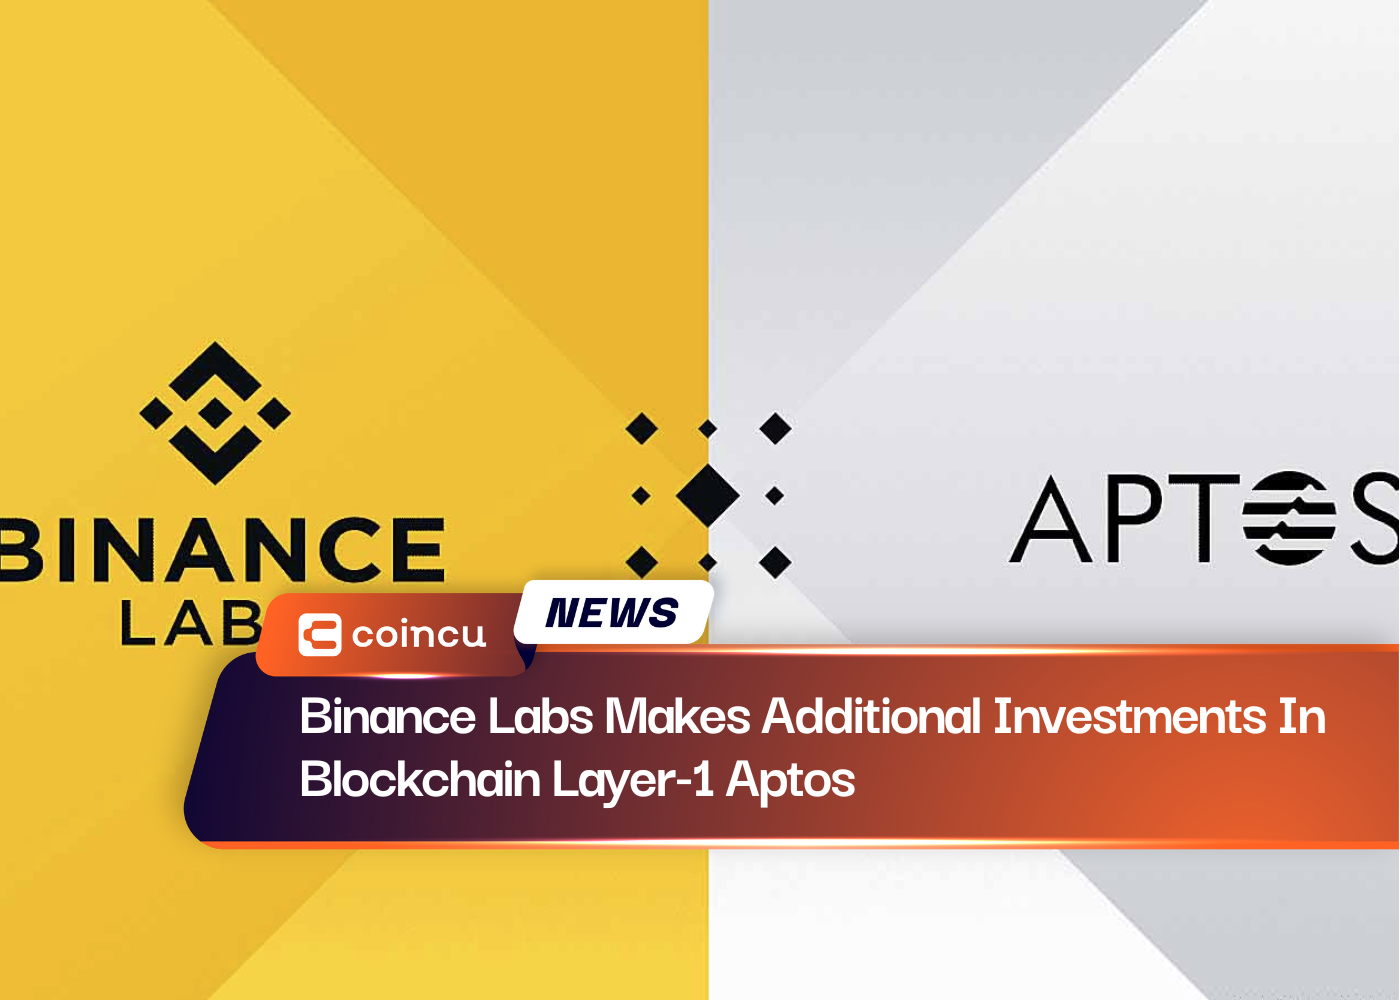 Binance Labs Makes Additional Investments In Blockchain Layer-1 Aptos